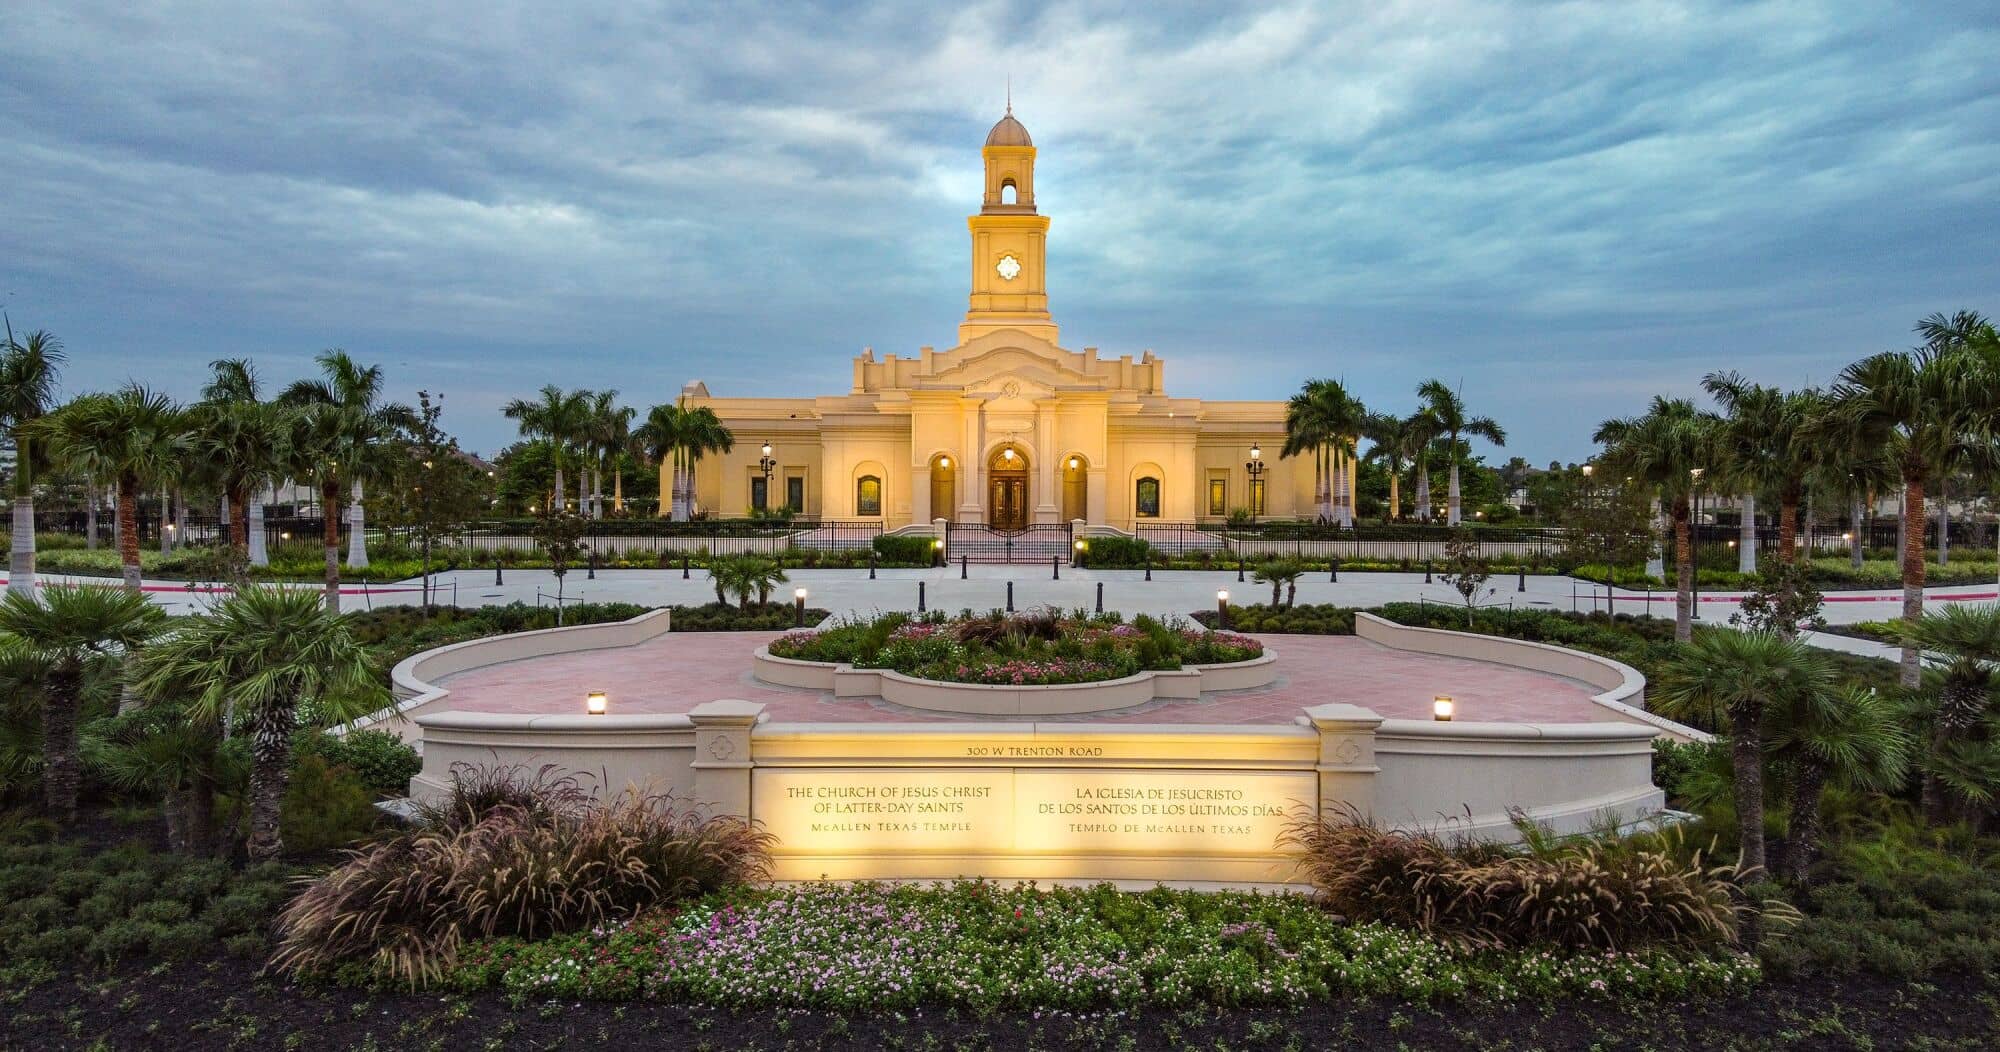 The exterior of the McAllen Texas Temple, a white building with a center tower above it.